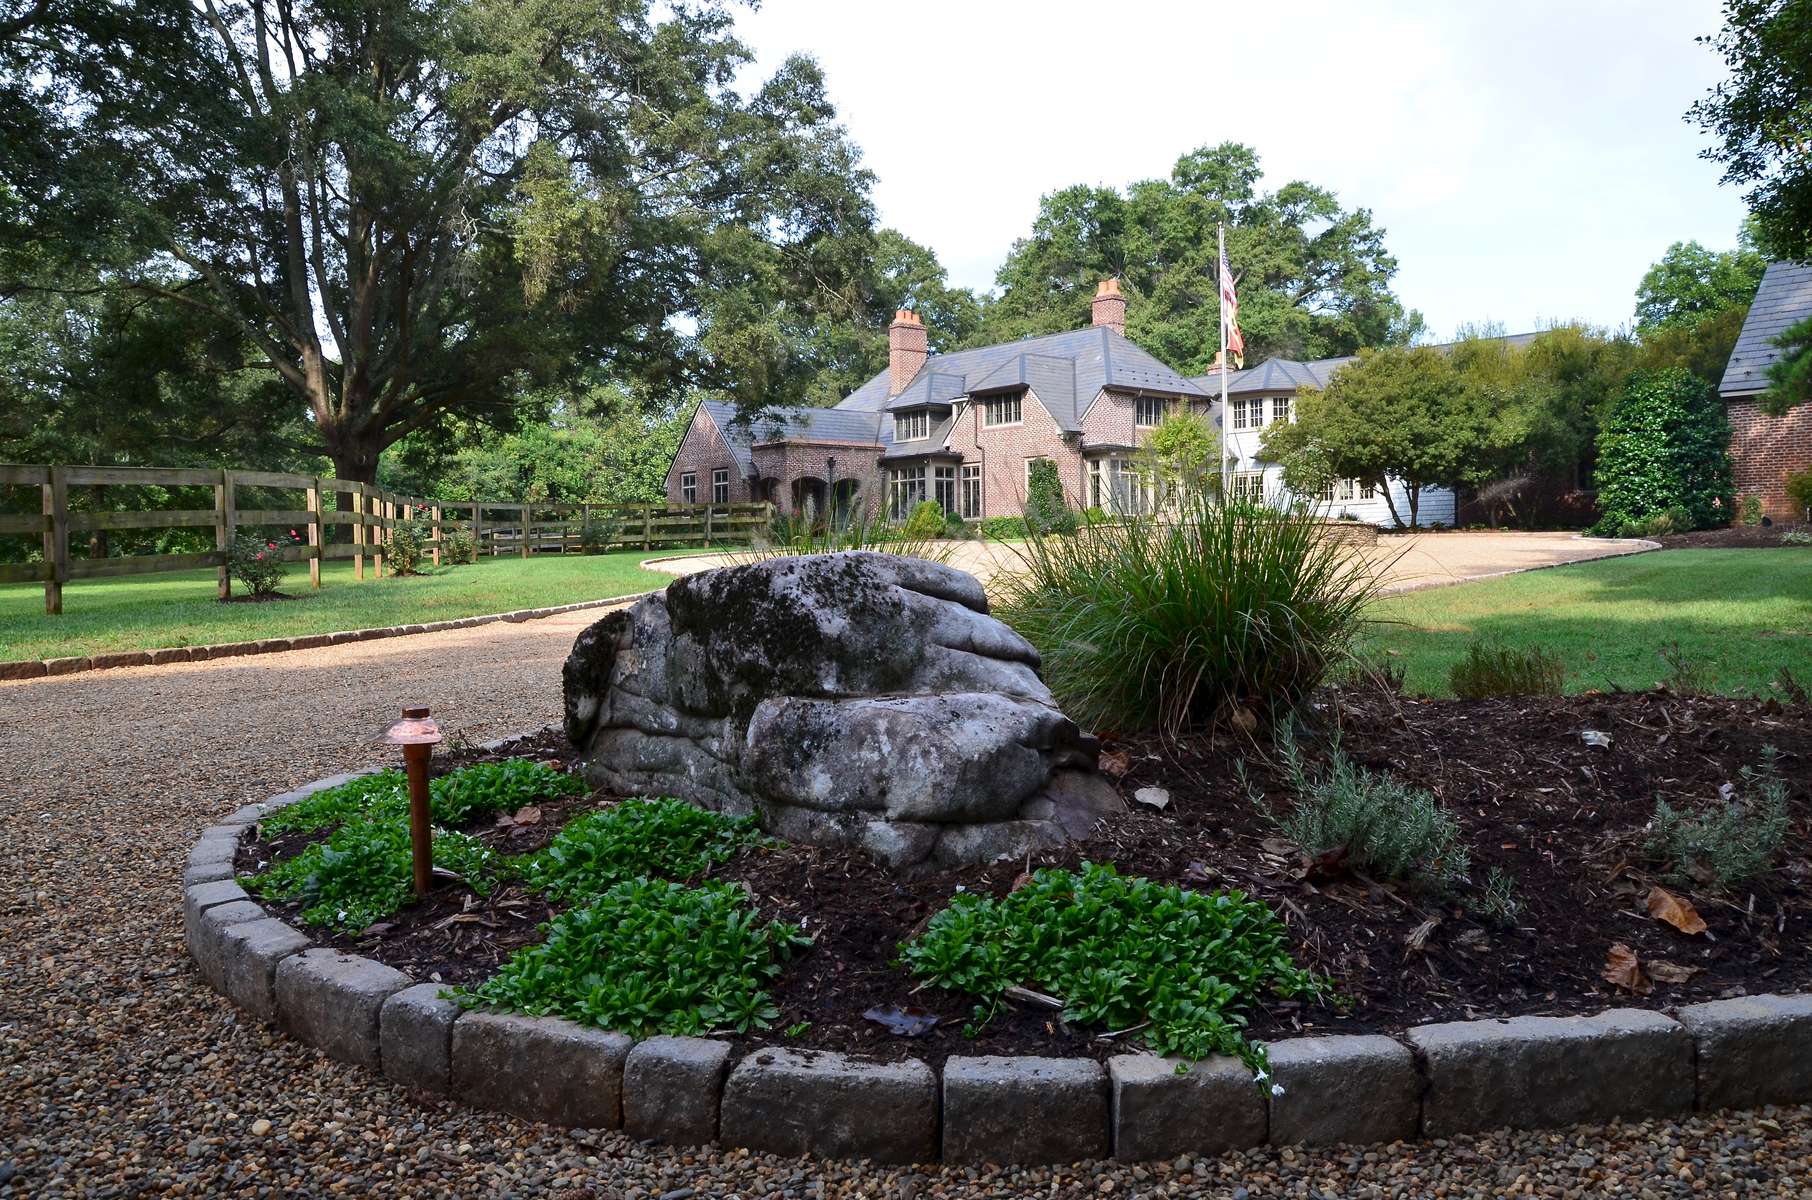 The stone planting bed serves as the first focal point upon entry and delights the senses featuring Mazus, a flowering ground cover, as well as other carefully selected perennials. 